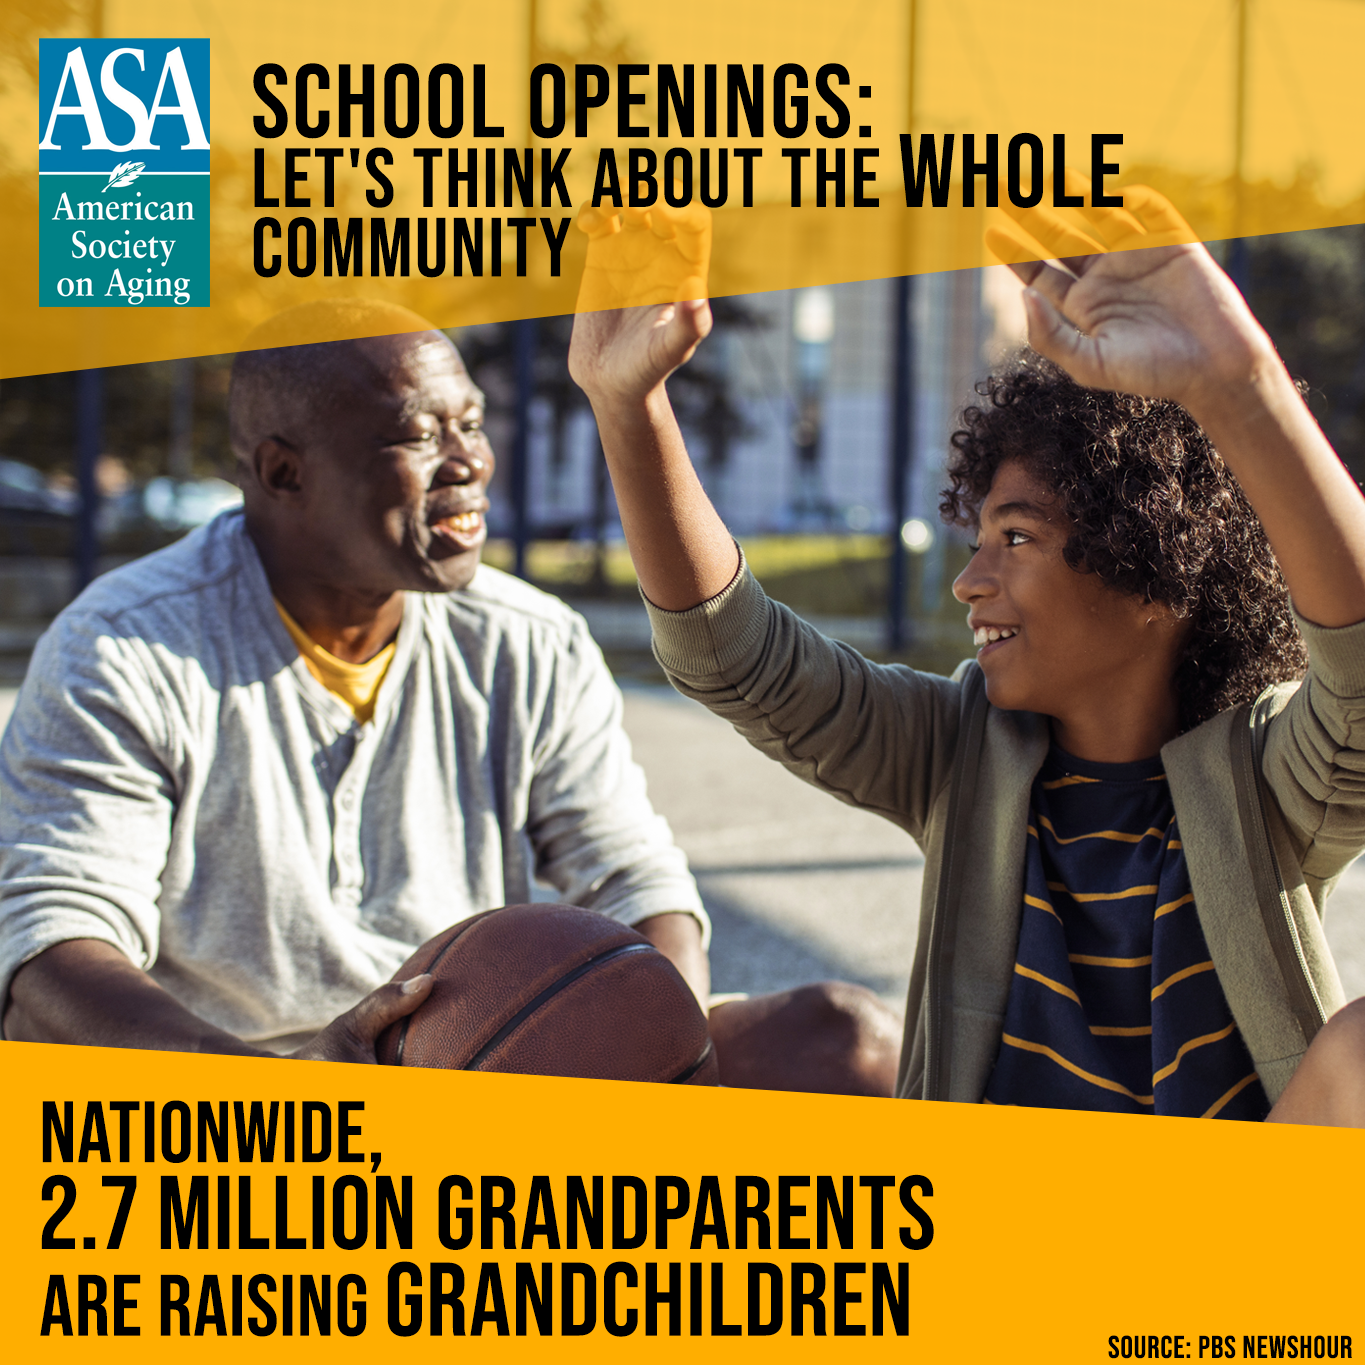 School Openings: Let's think about the whole community. 2.7 million grandparents are raising grandchildren nationwide